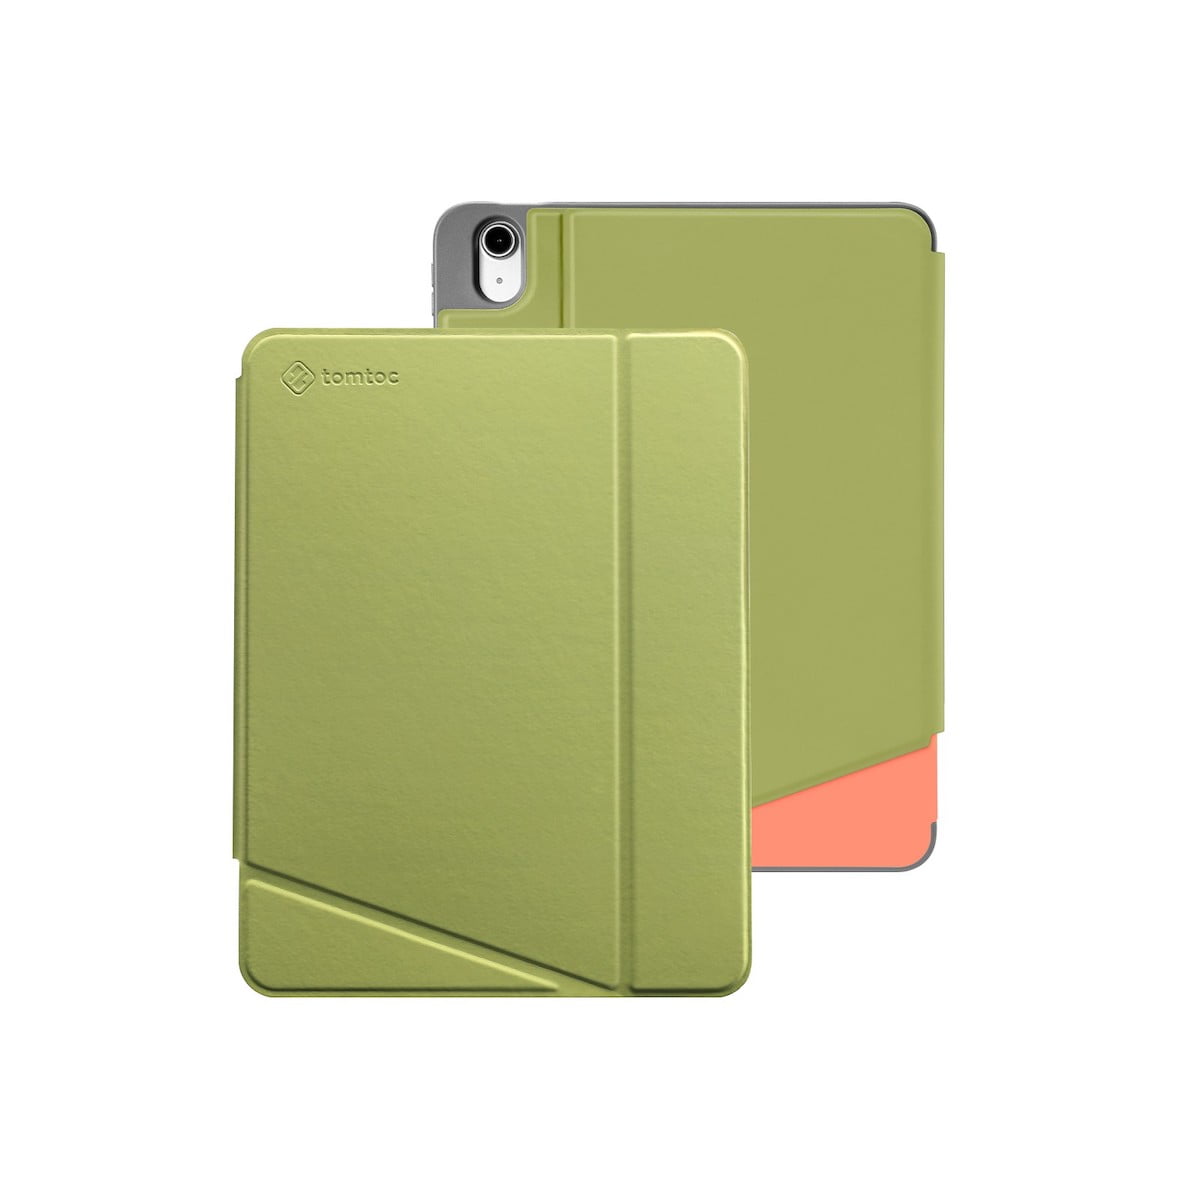 What kind of case do you use for your iPad? : r/ipad